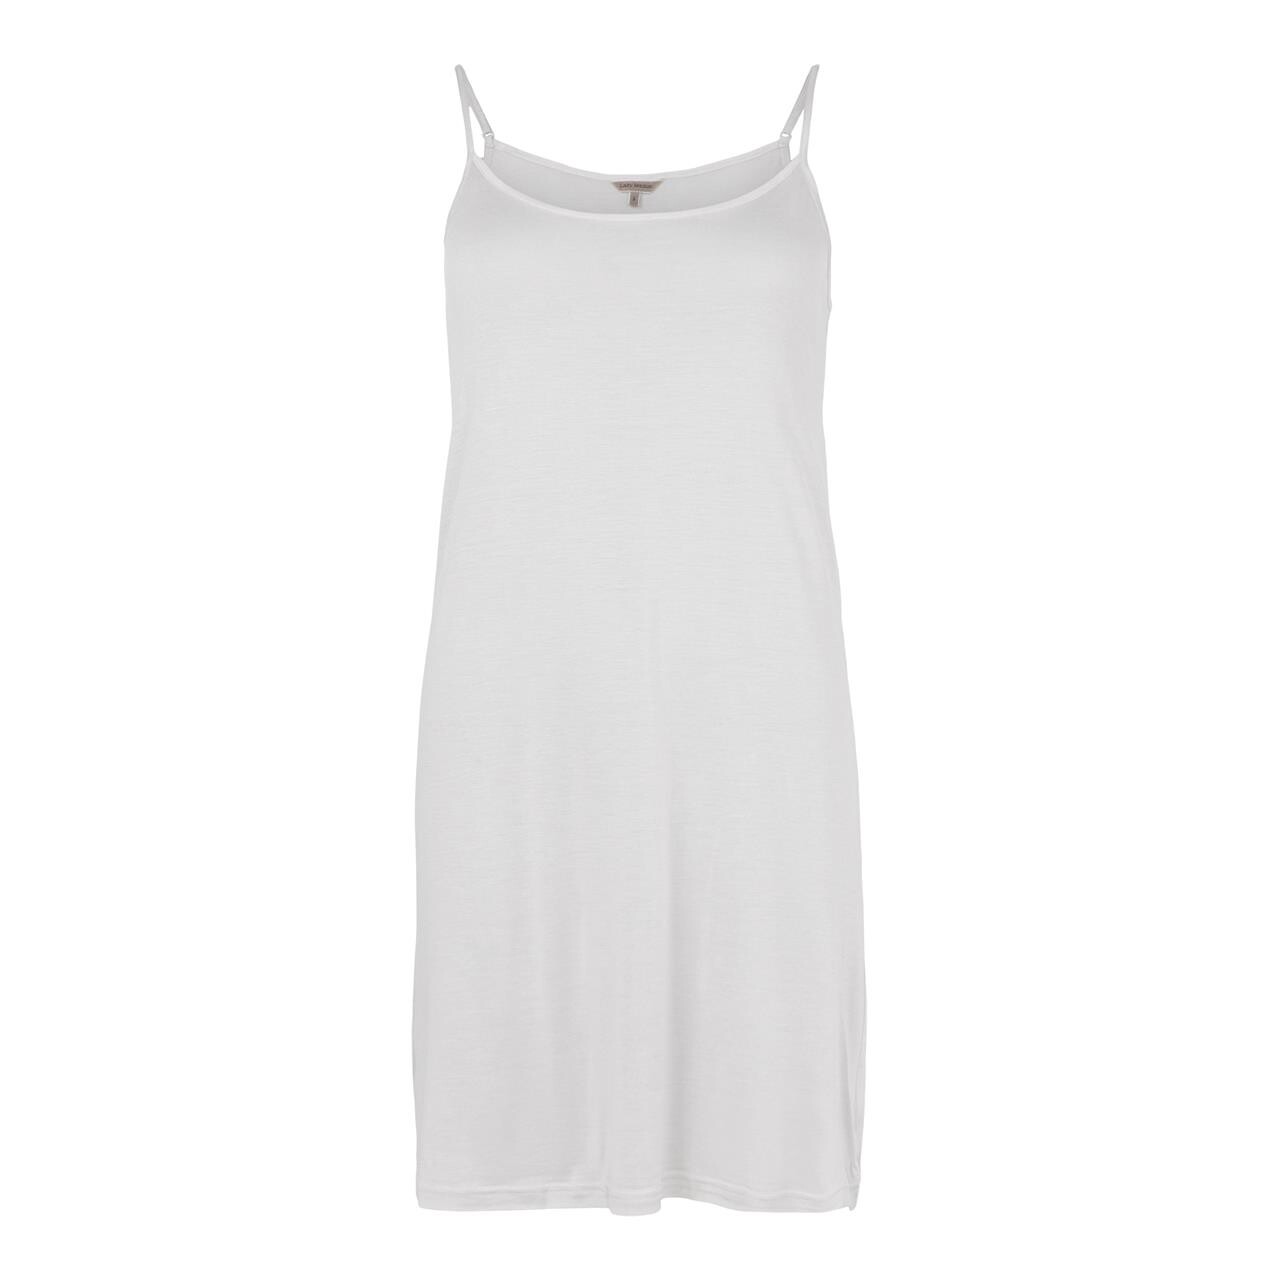 LADY AVENUE SILK JERSEY CHEMISE 23-20424 00 (Off White, XL)